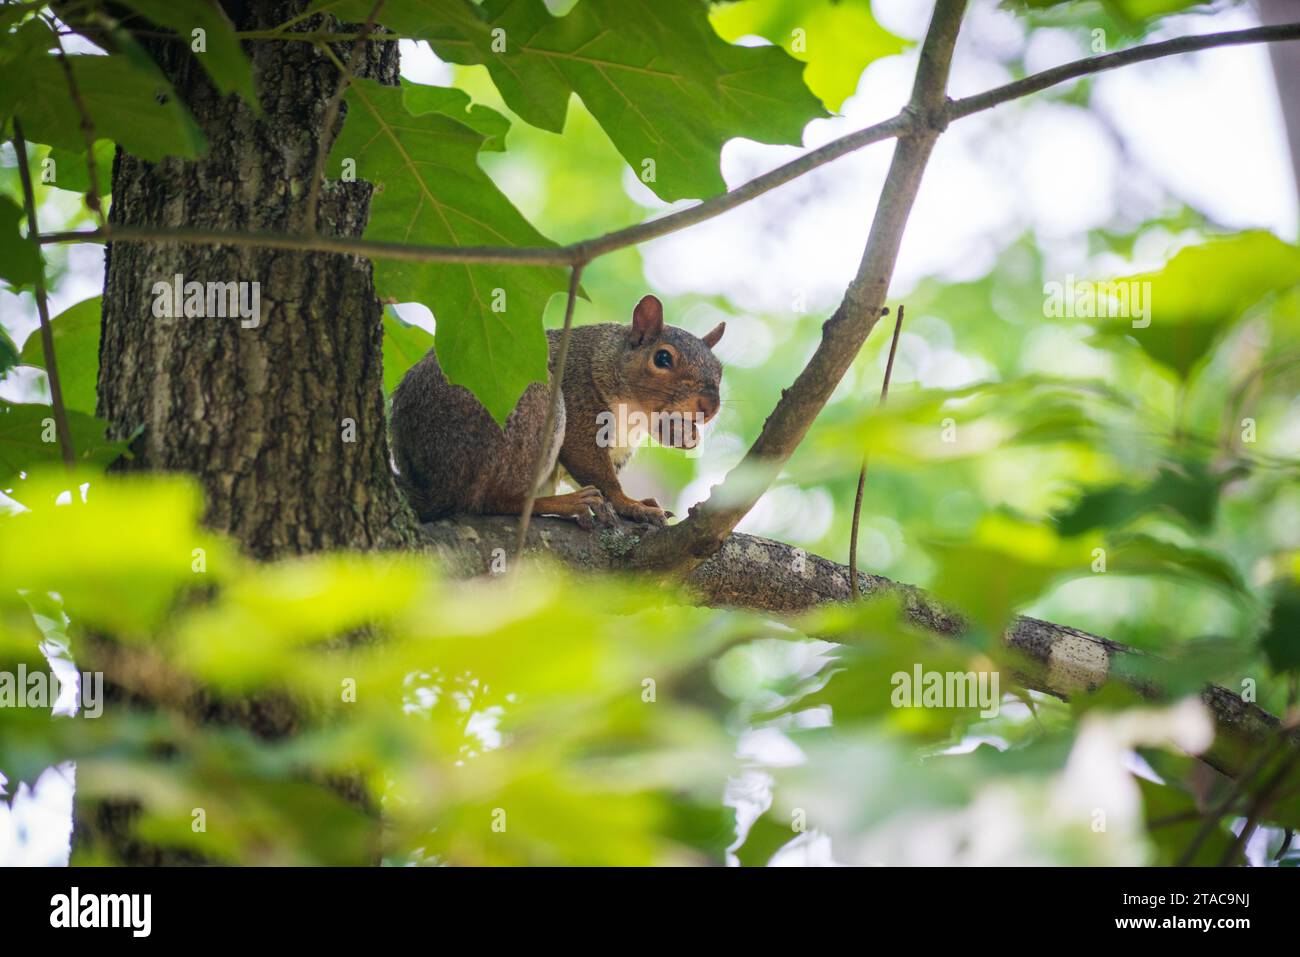 Squirrel in a Tree With a Nut Stock Photo